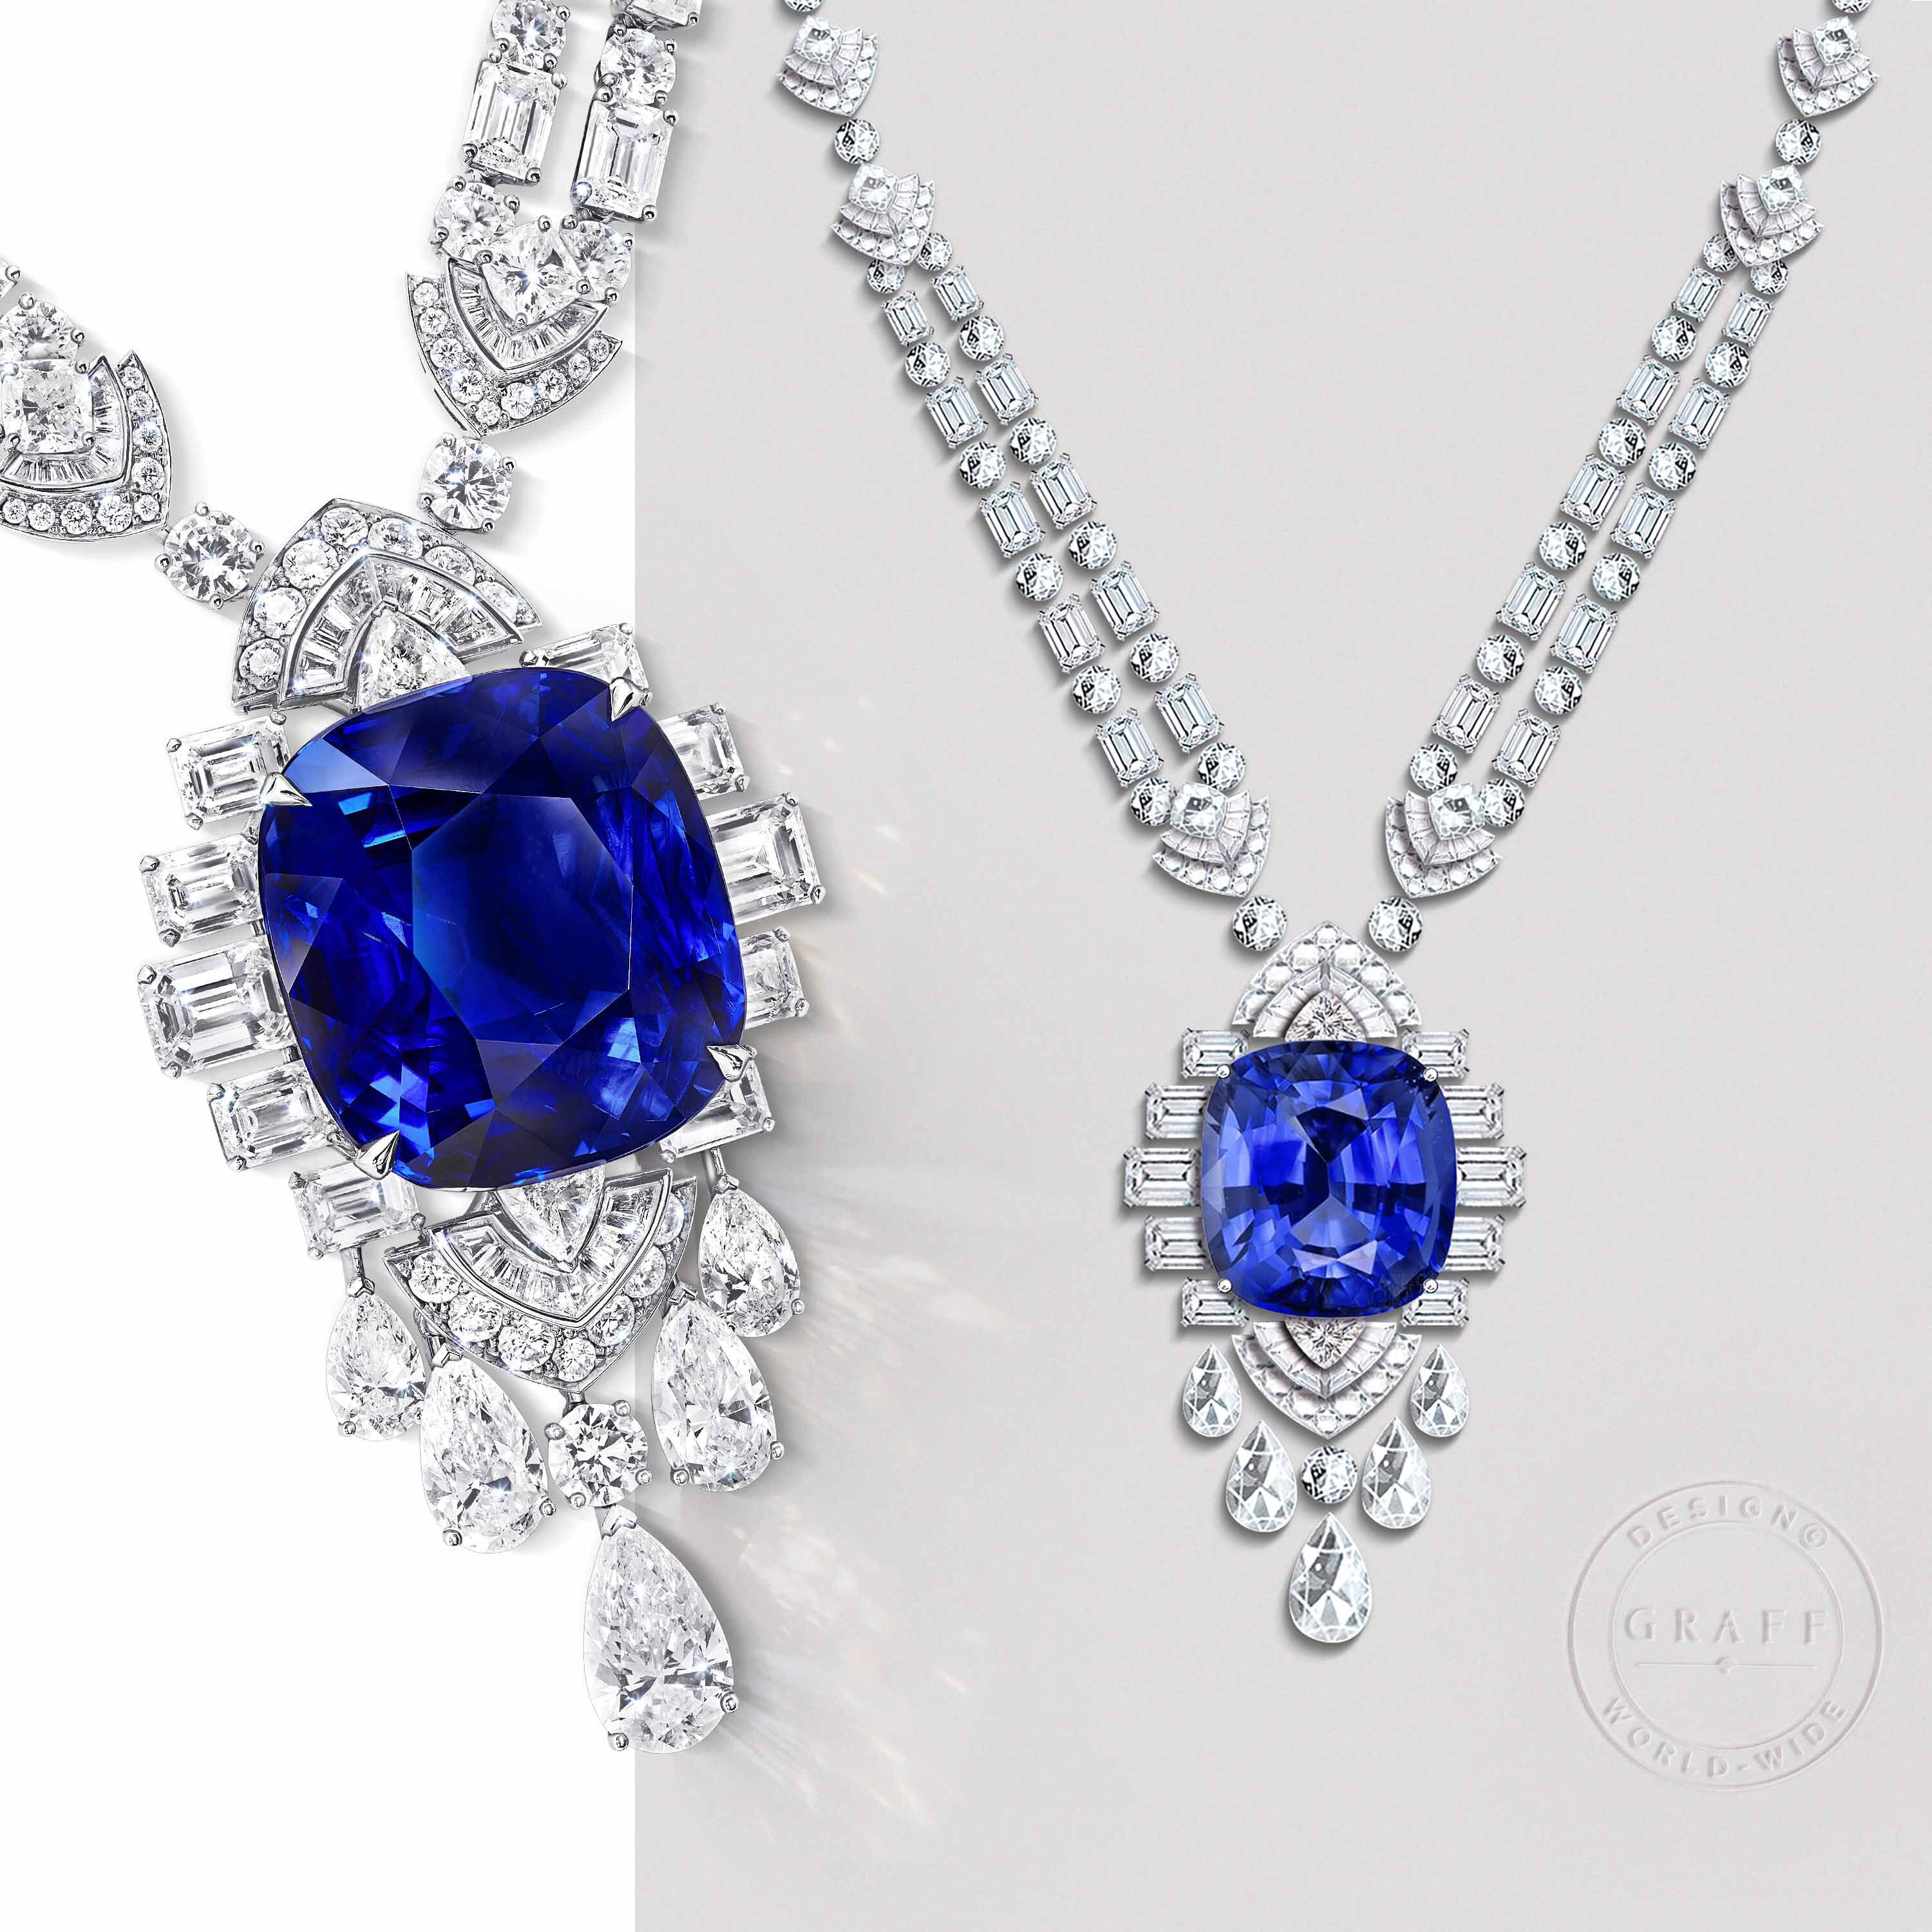 Image and drawing of Graff sapphire and white diamond high jewellery necklace